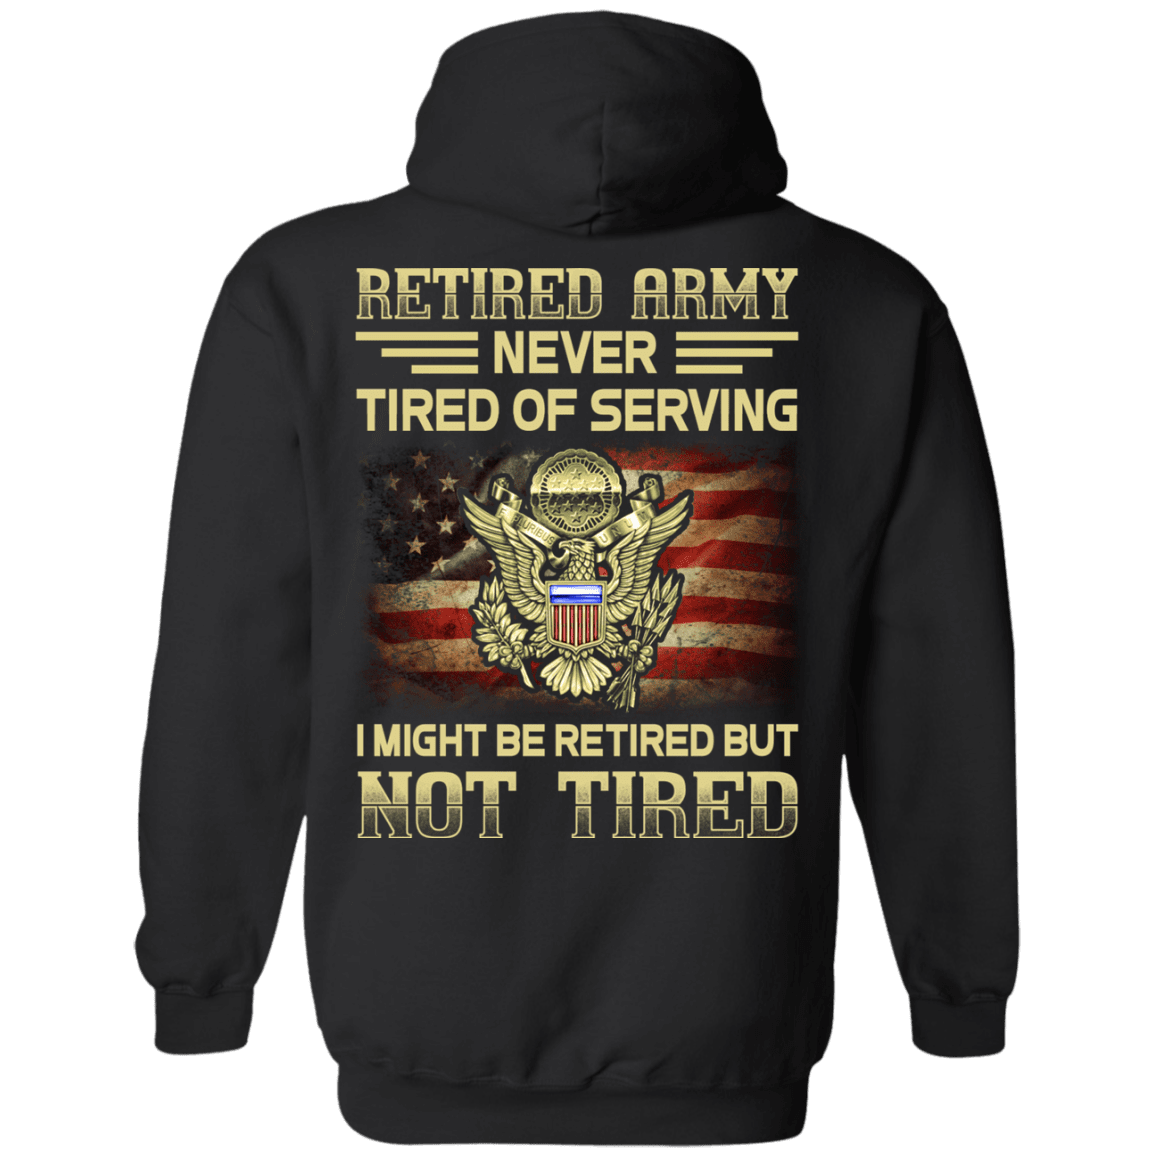 Retired Army Never Tired of Serving Back T Shirts-TShirt-Army-Veterans Nation